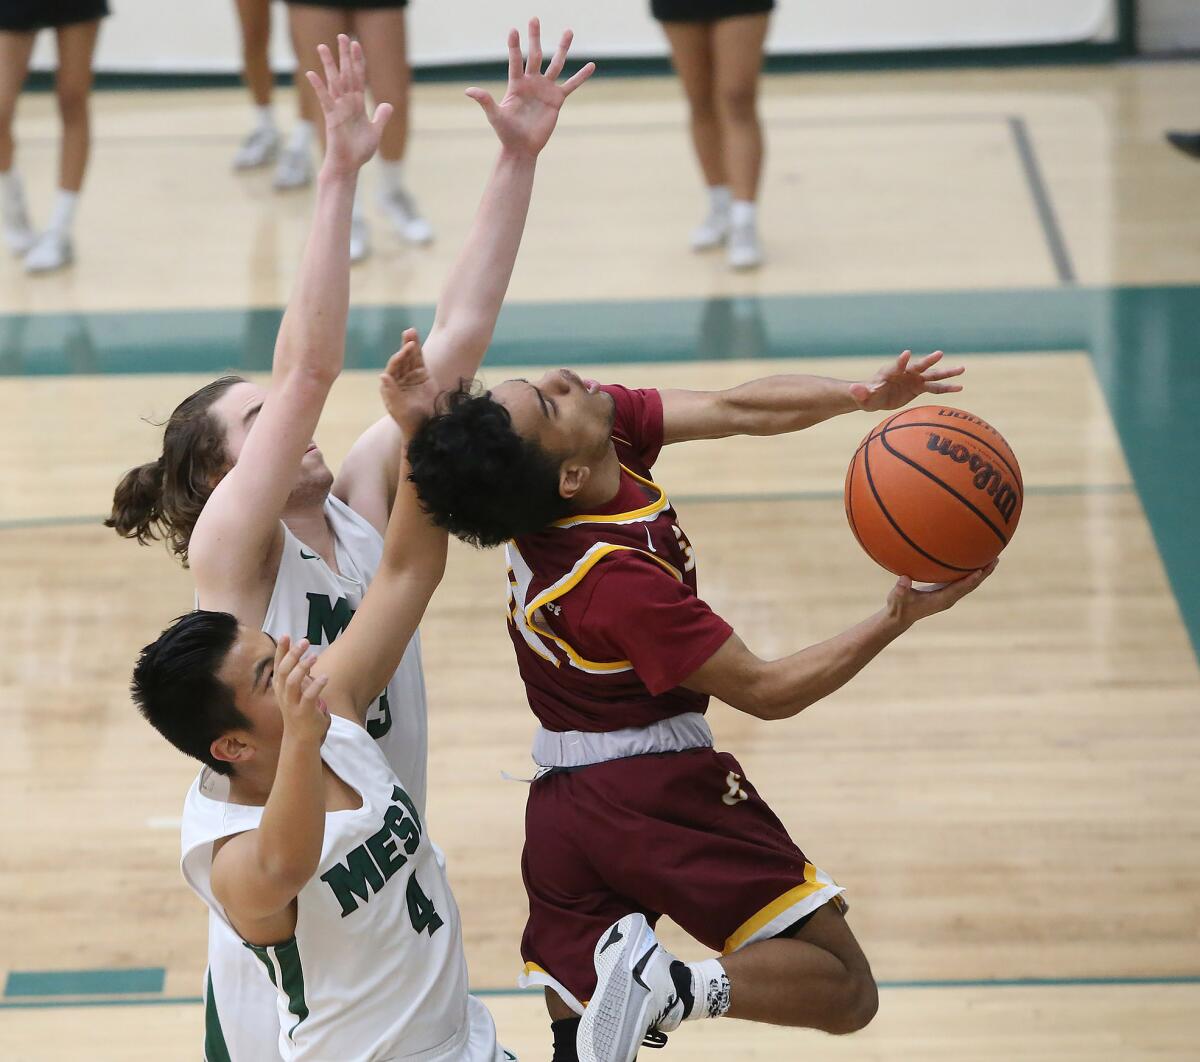 Estancia's Marvin Harry drives around Costa Mesa's Christian Dasca (4) and Alec Terry and is fouled during an Orange Coast League game on Wednesday.